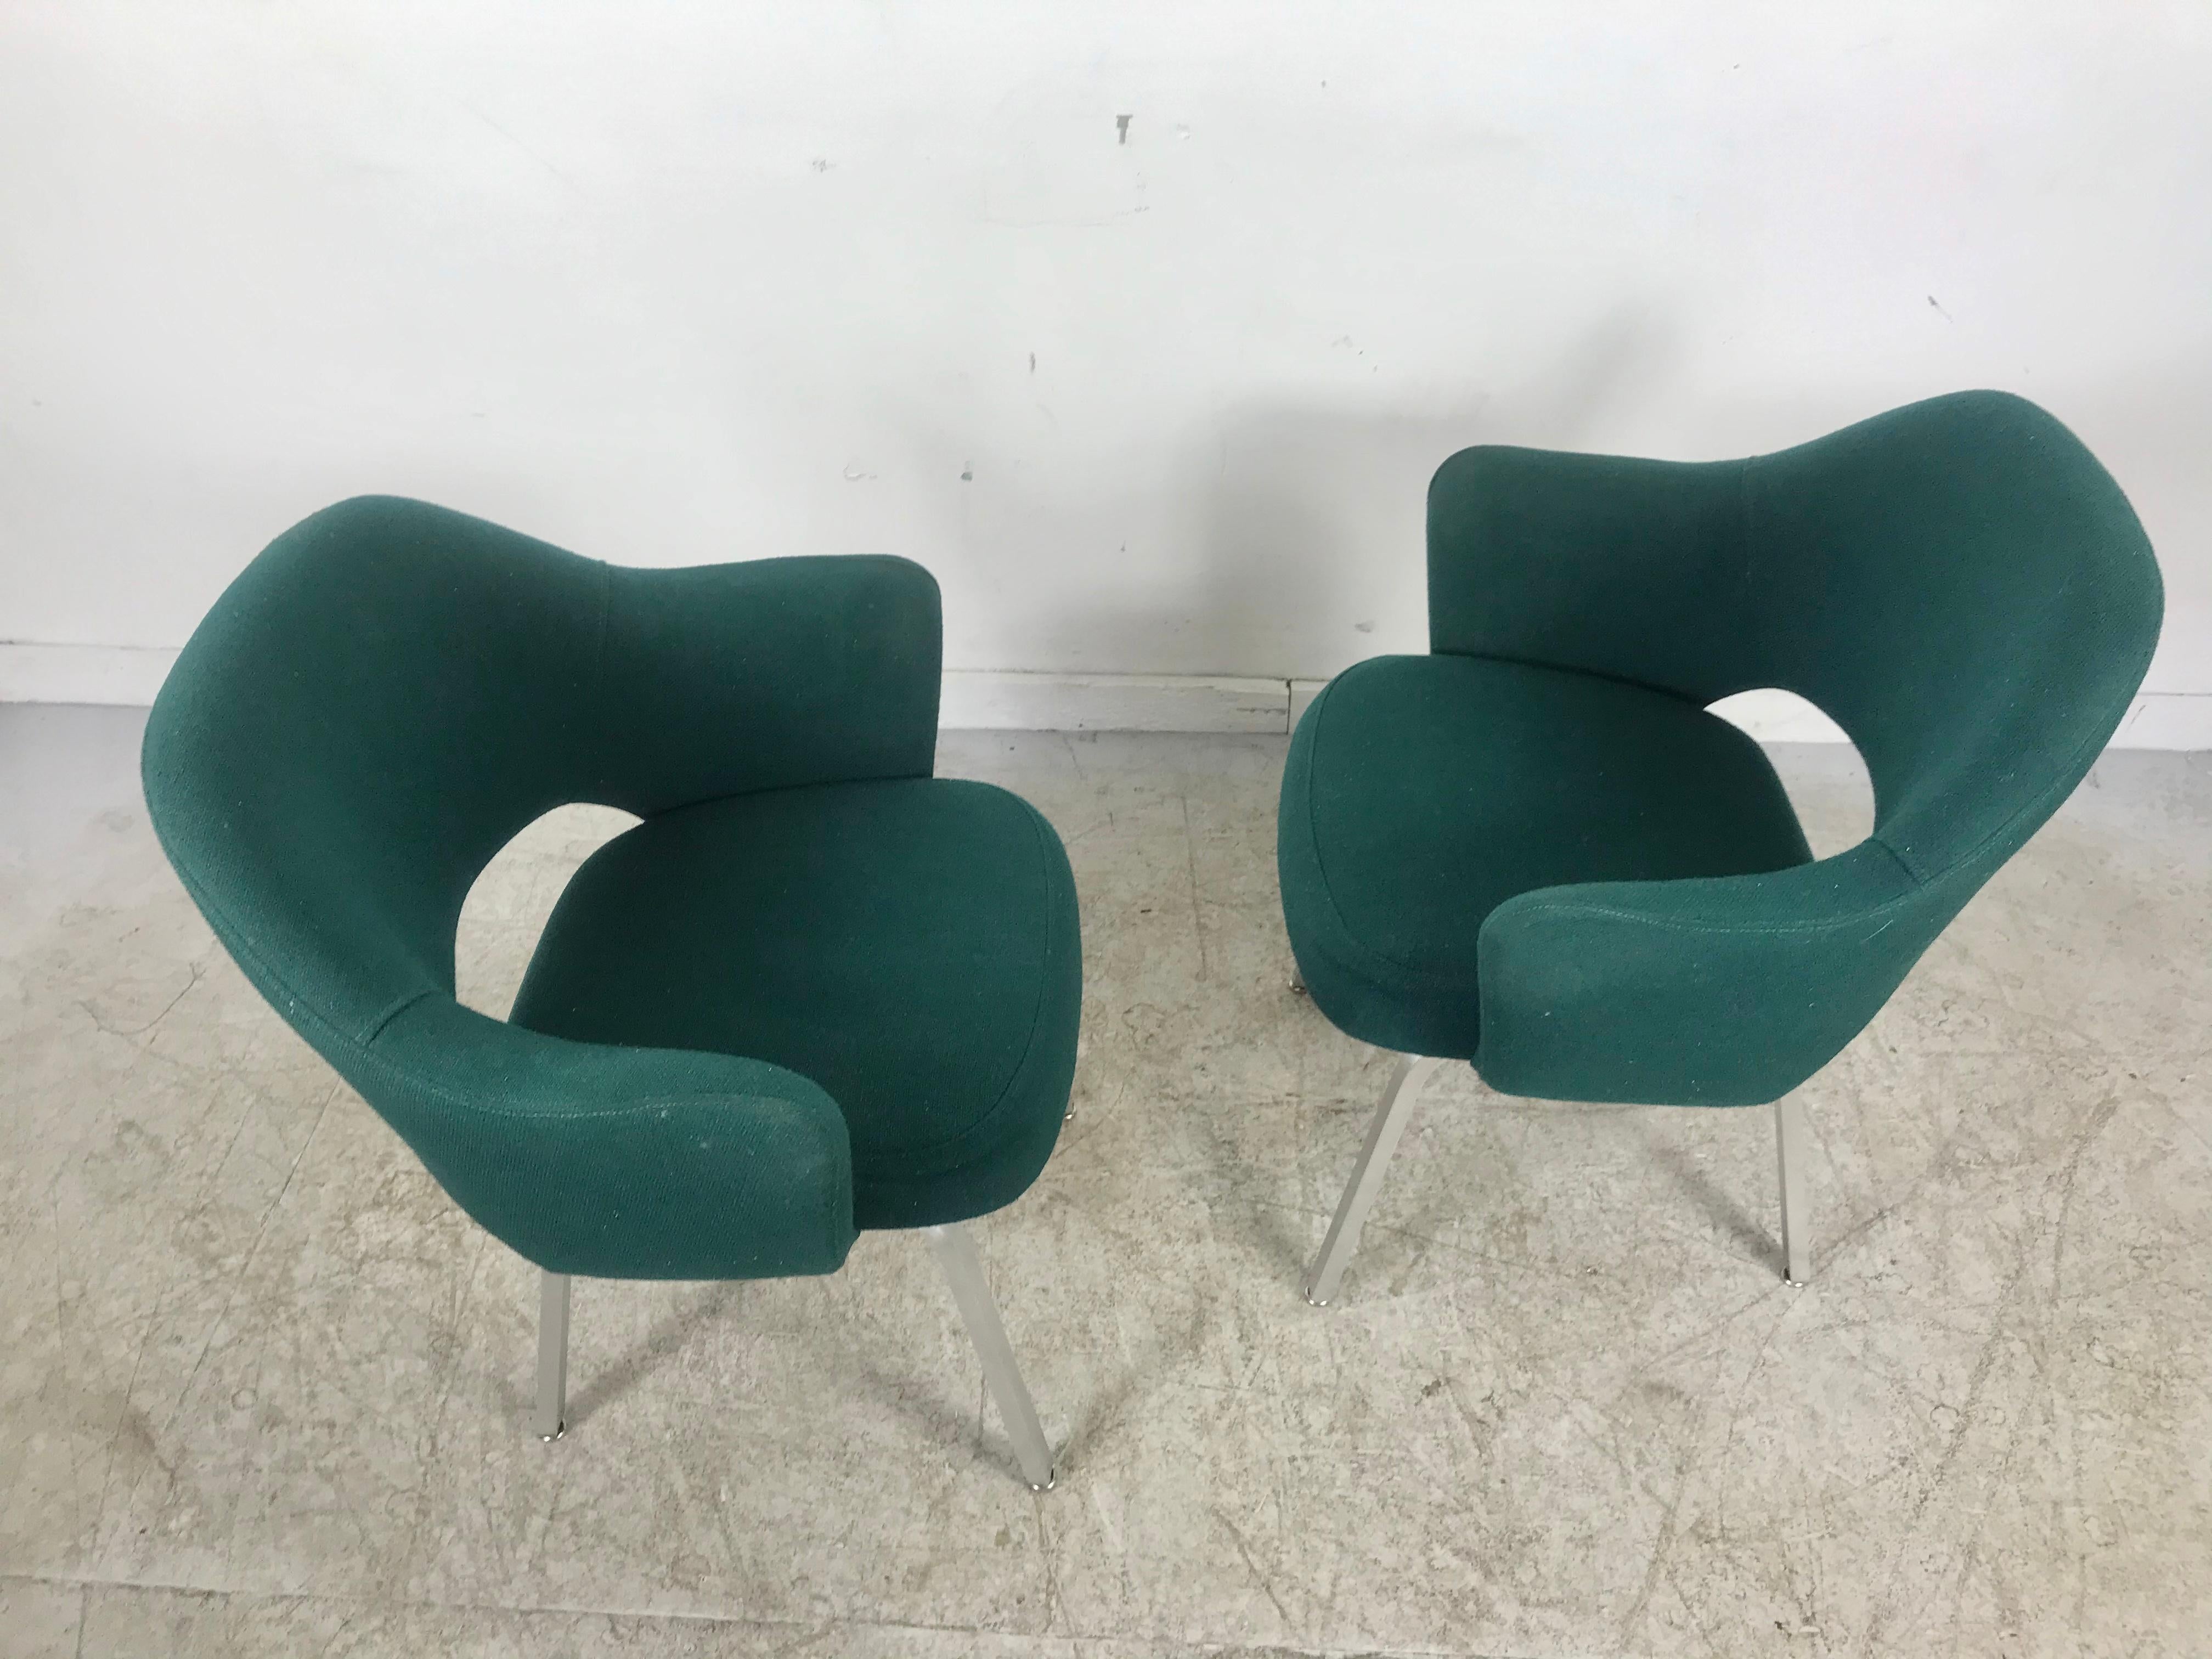 Seldom Seen Pair of Early Saarinen/Knoll Executive Armchairs, Aluminum Bases In Good Condition For Sale In Buffalo, NY